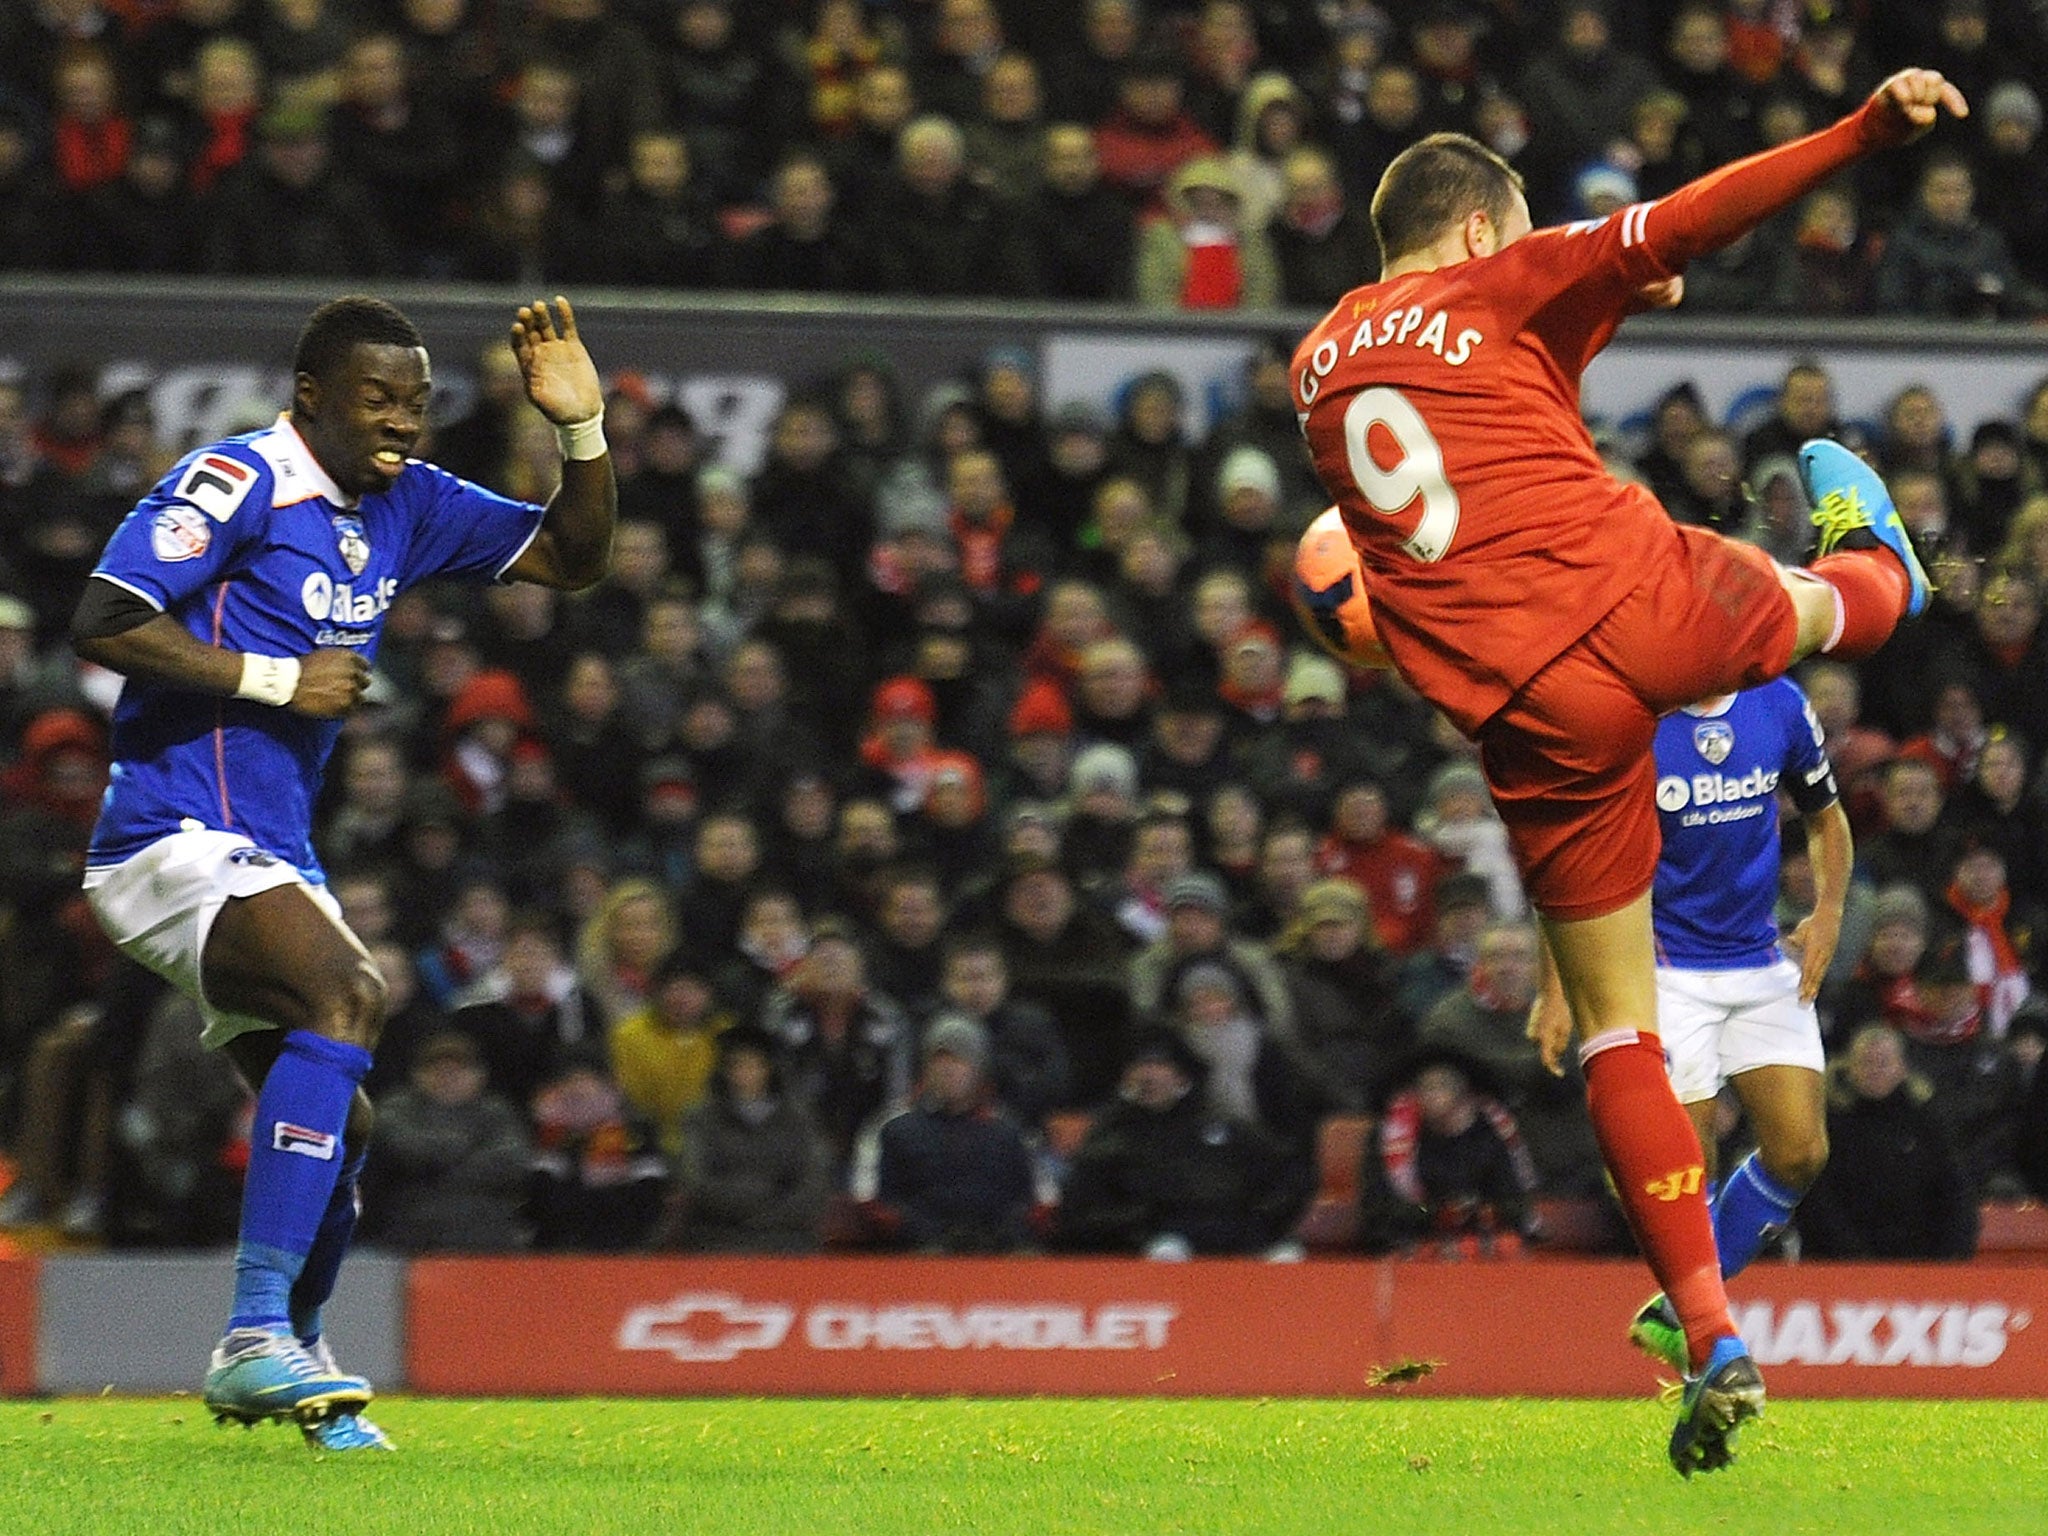 Liverpool's Iago Aspas scores the first goal during their FA Cup Third Round match against Oldham Athletic